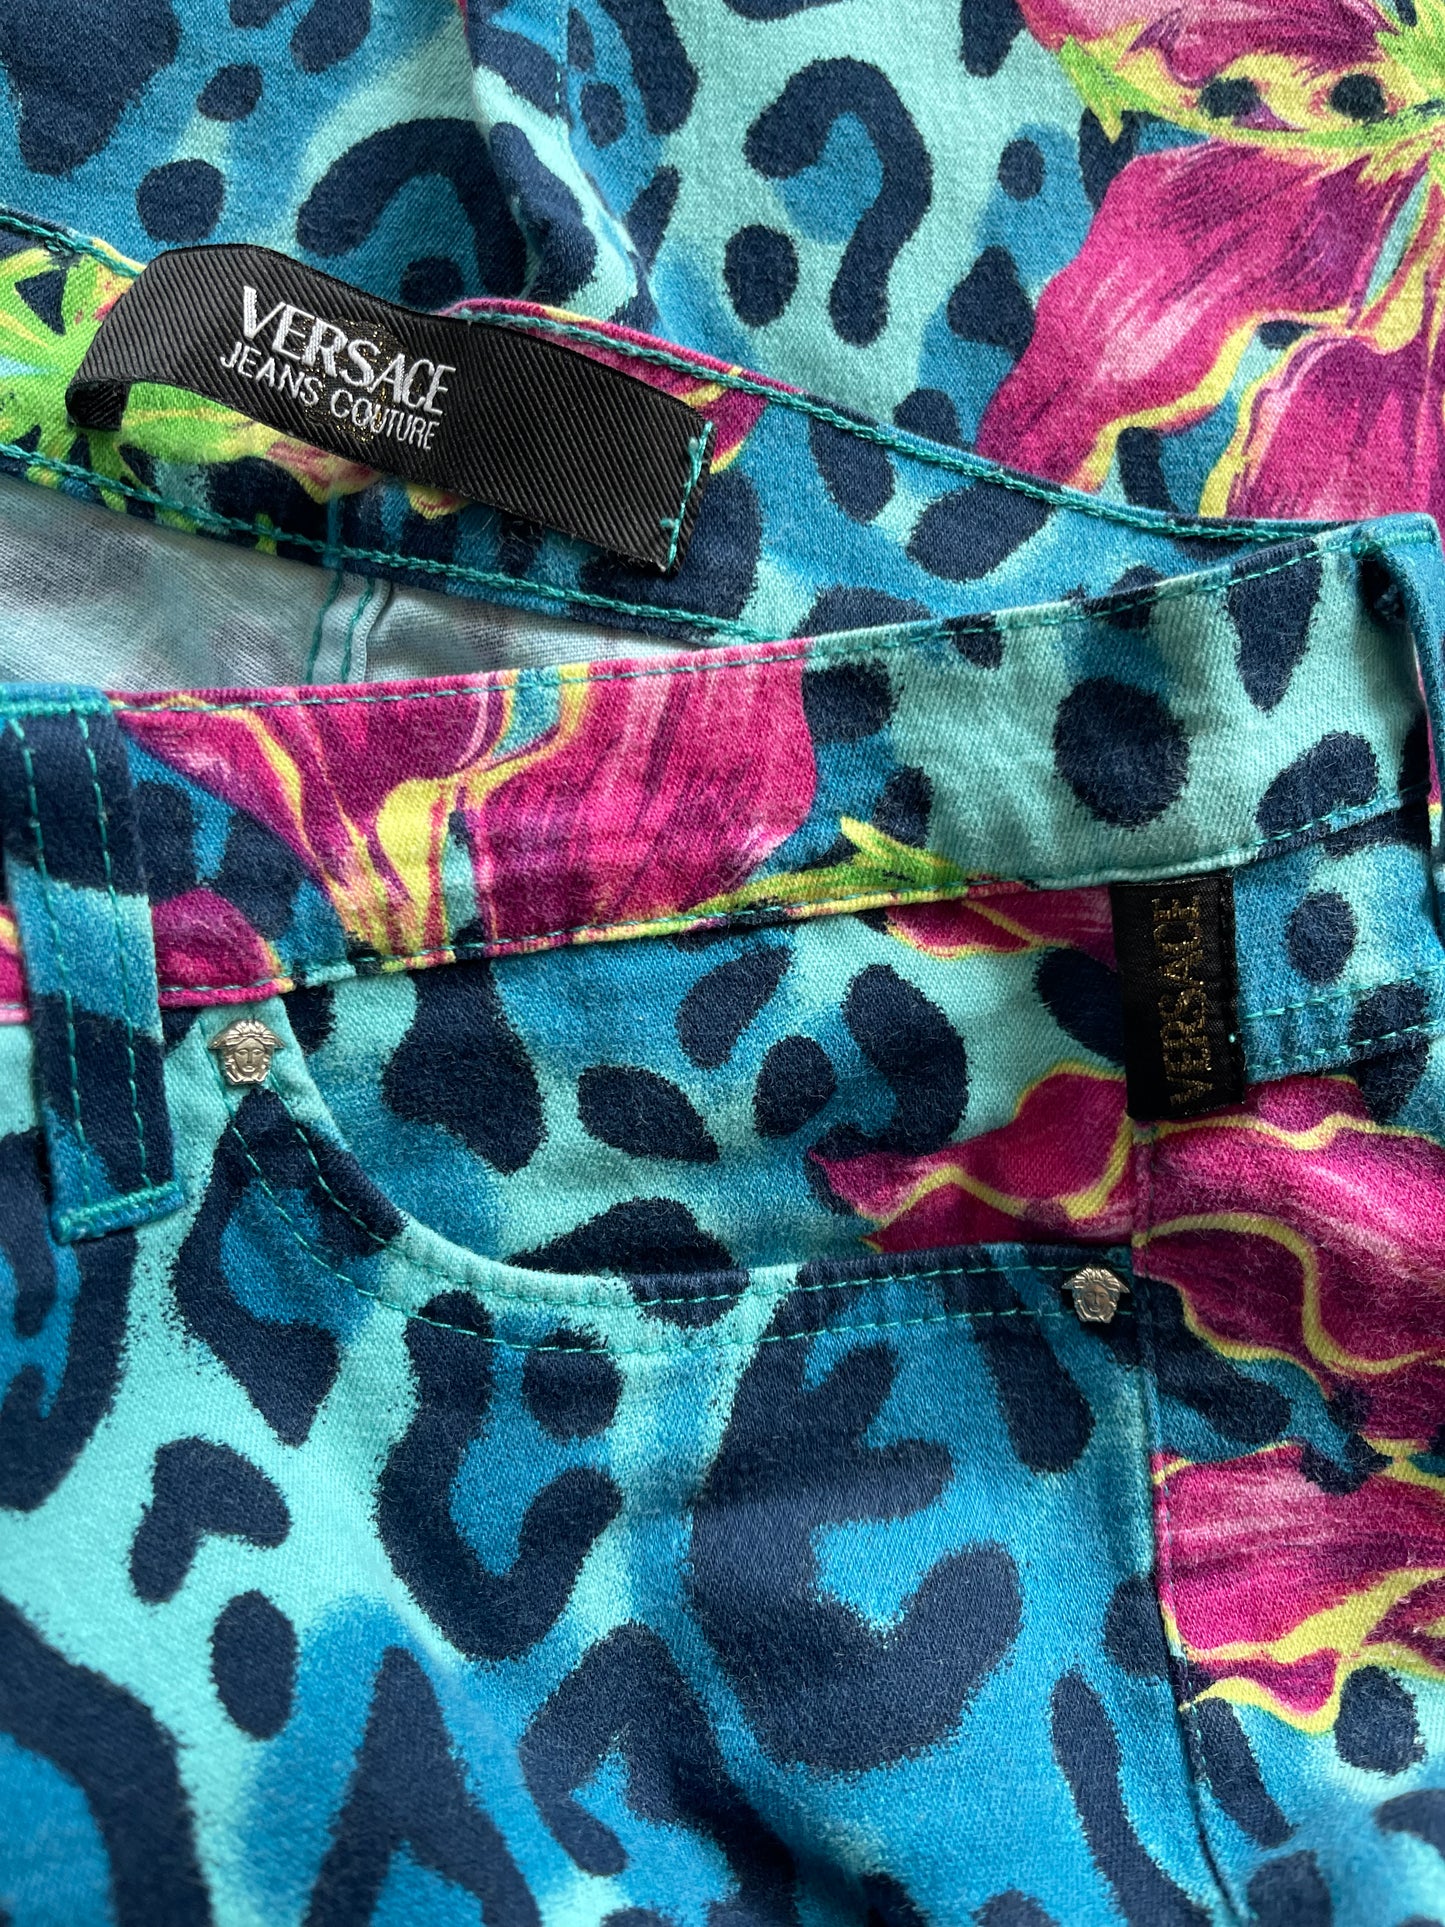 Y2K Versace Jeans Couture Ittierre Medusa Pants Made in Italy Animal Leopard Floral Flower Lilac Print Mid Waist Cotton